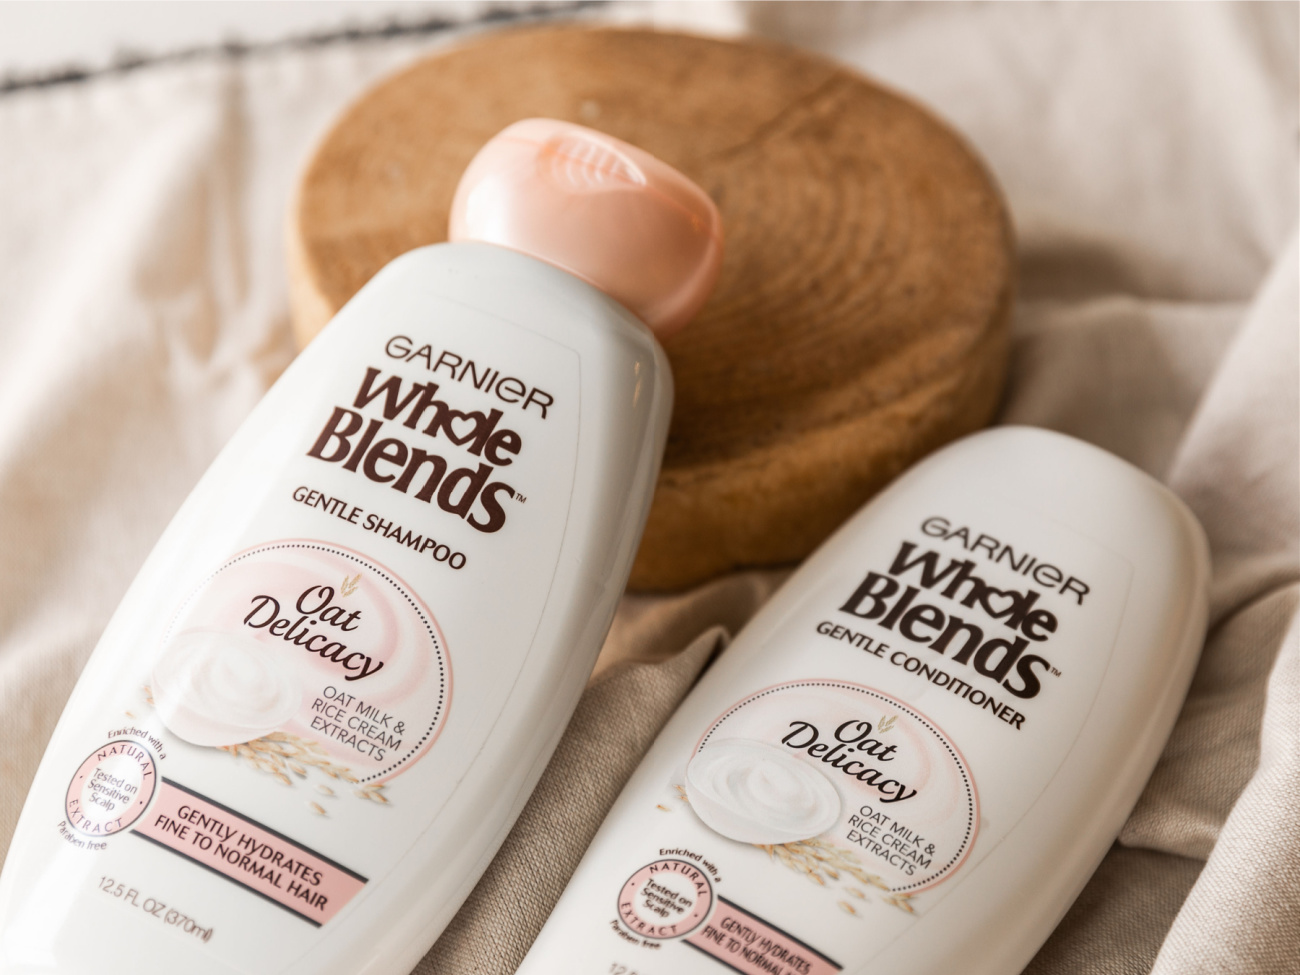 Garnier Whole Blends Haircare As Low As $1.99 At Kroger